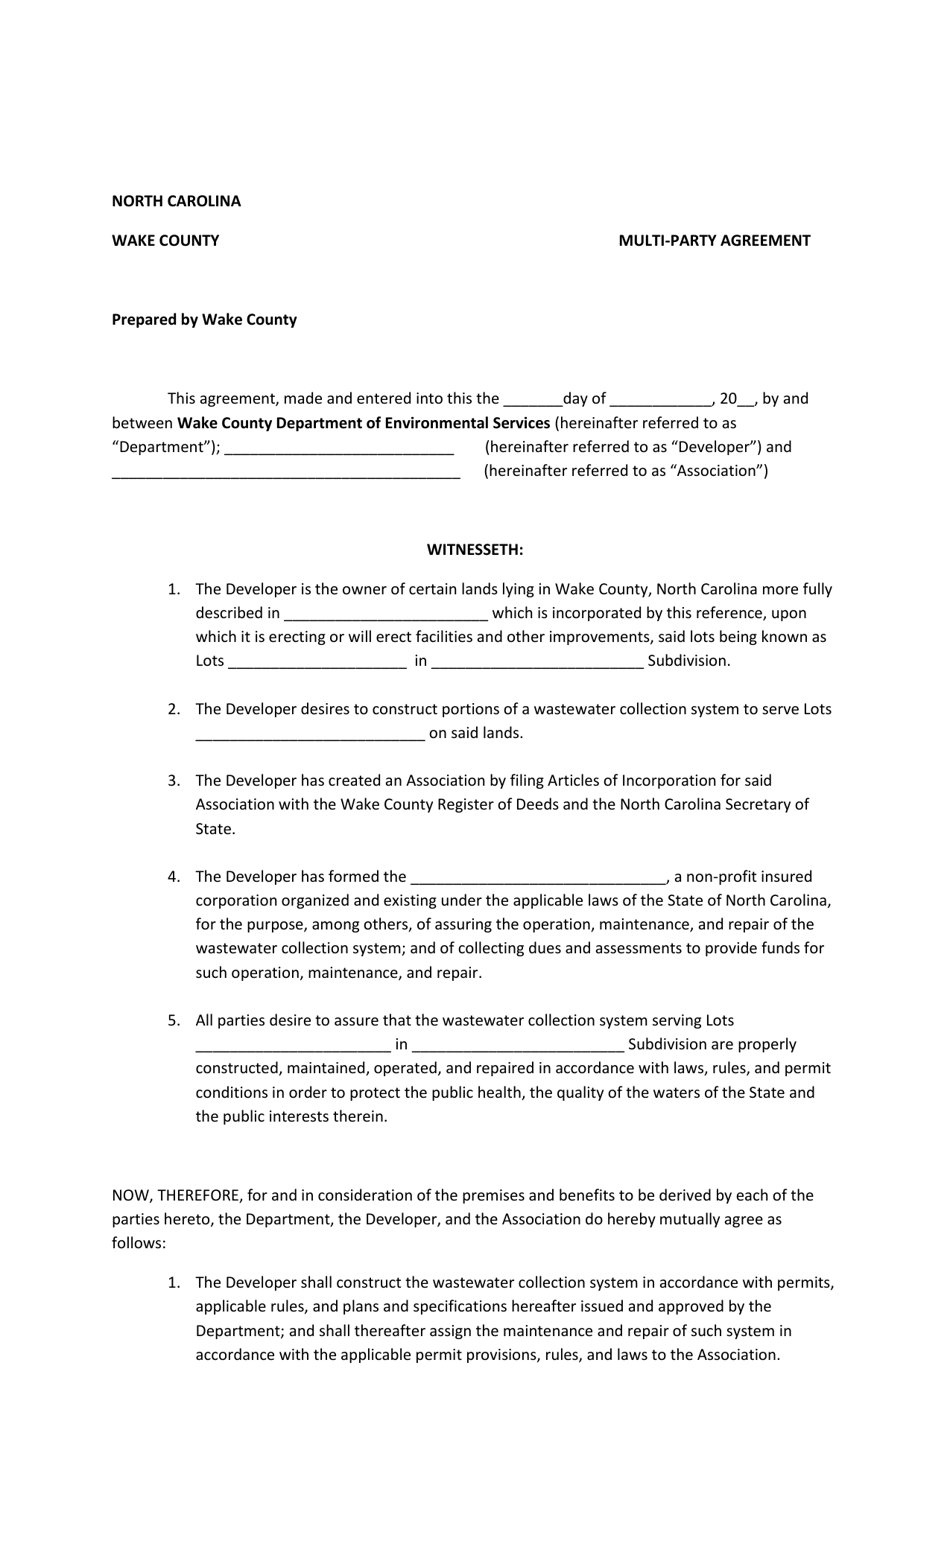 Multi-Party Agreement Template for off-Site Septic System Easements - Wake County, North Carolina, Page 1